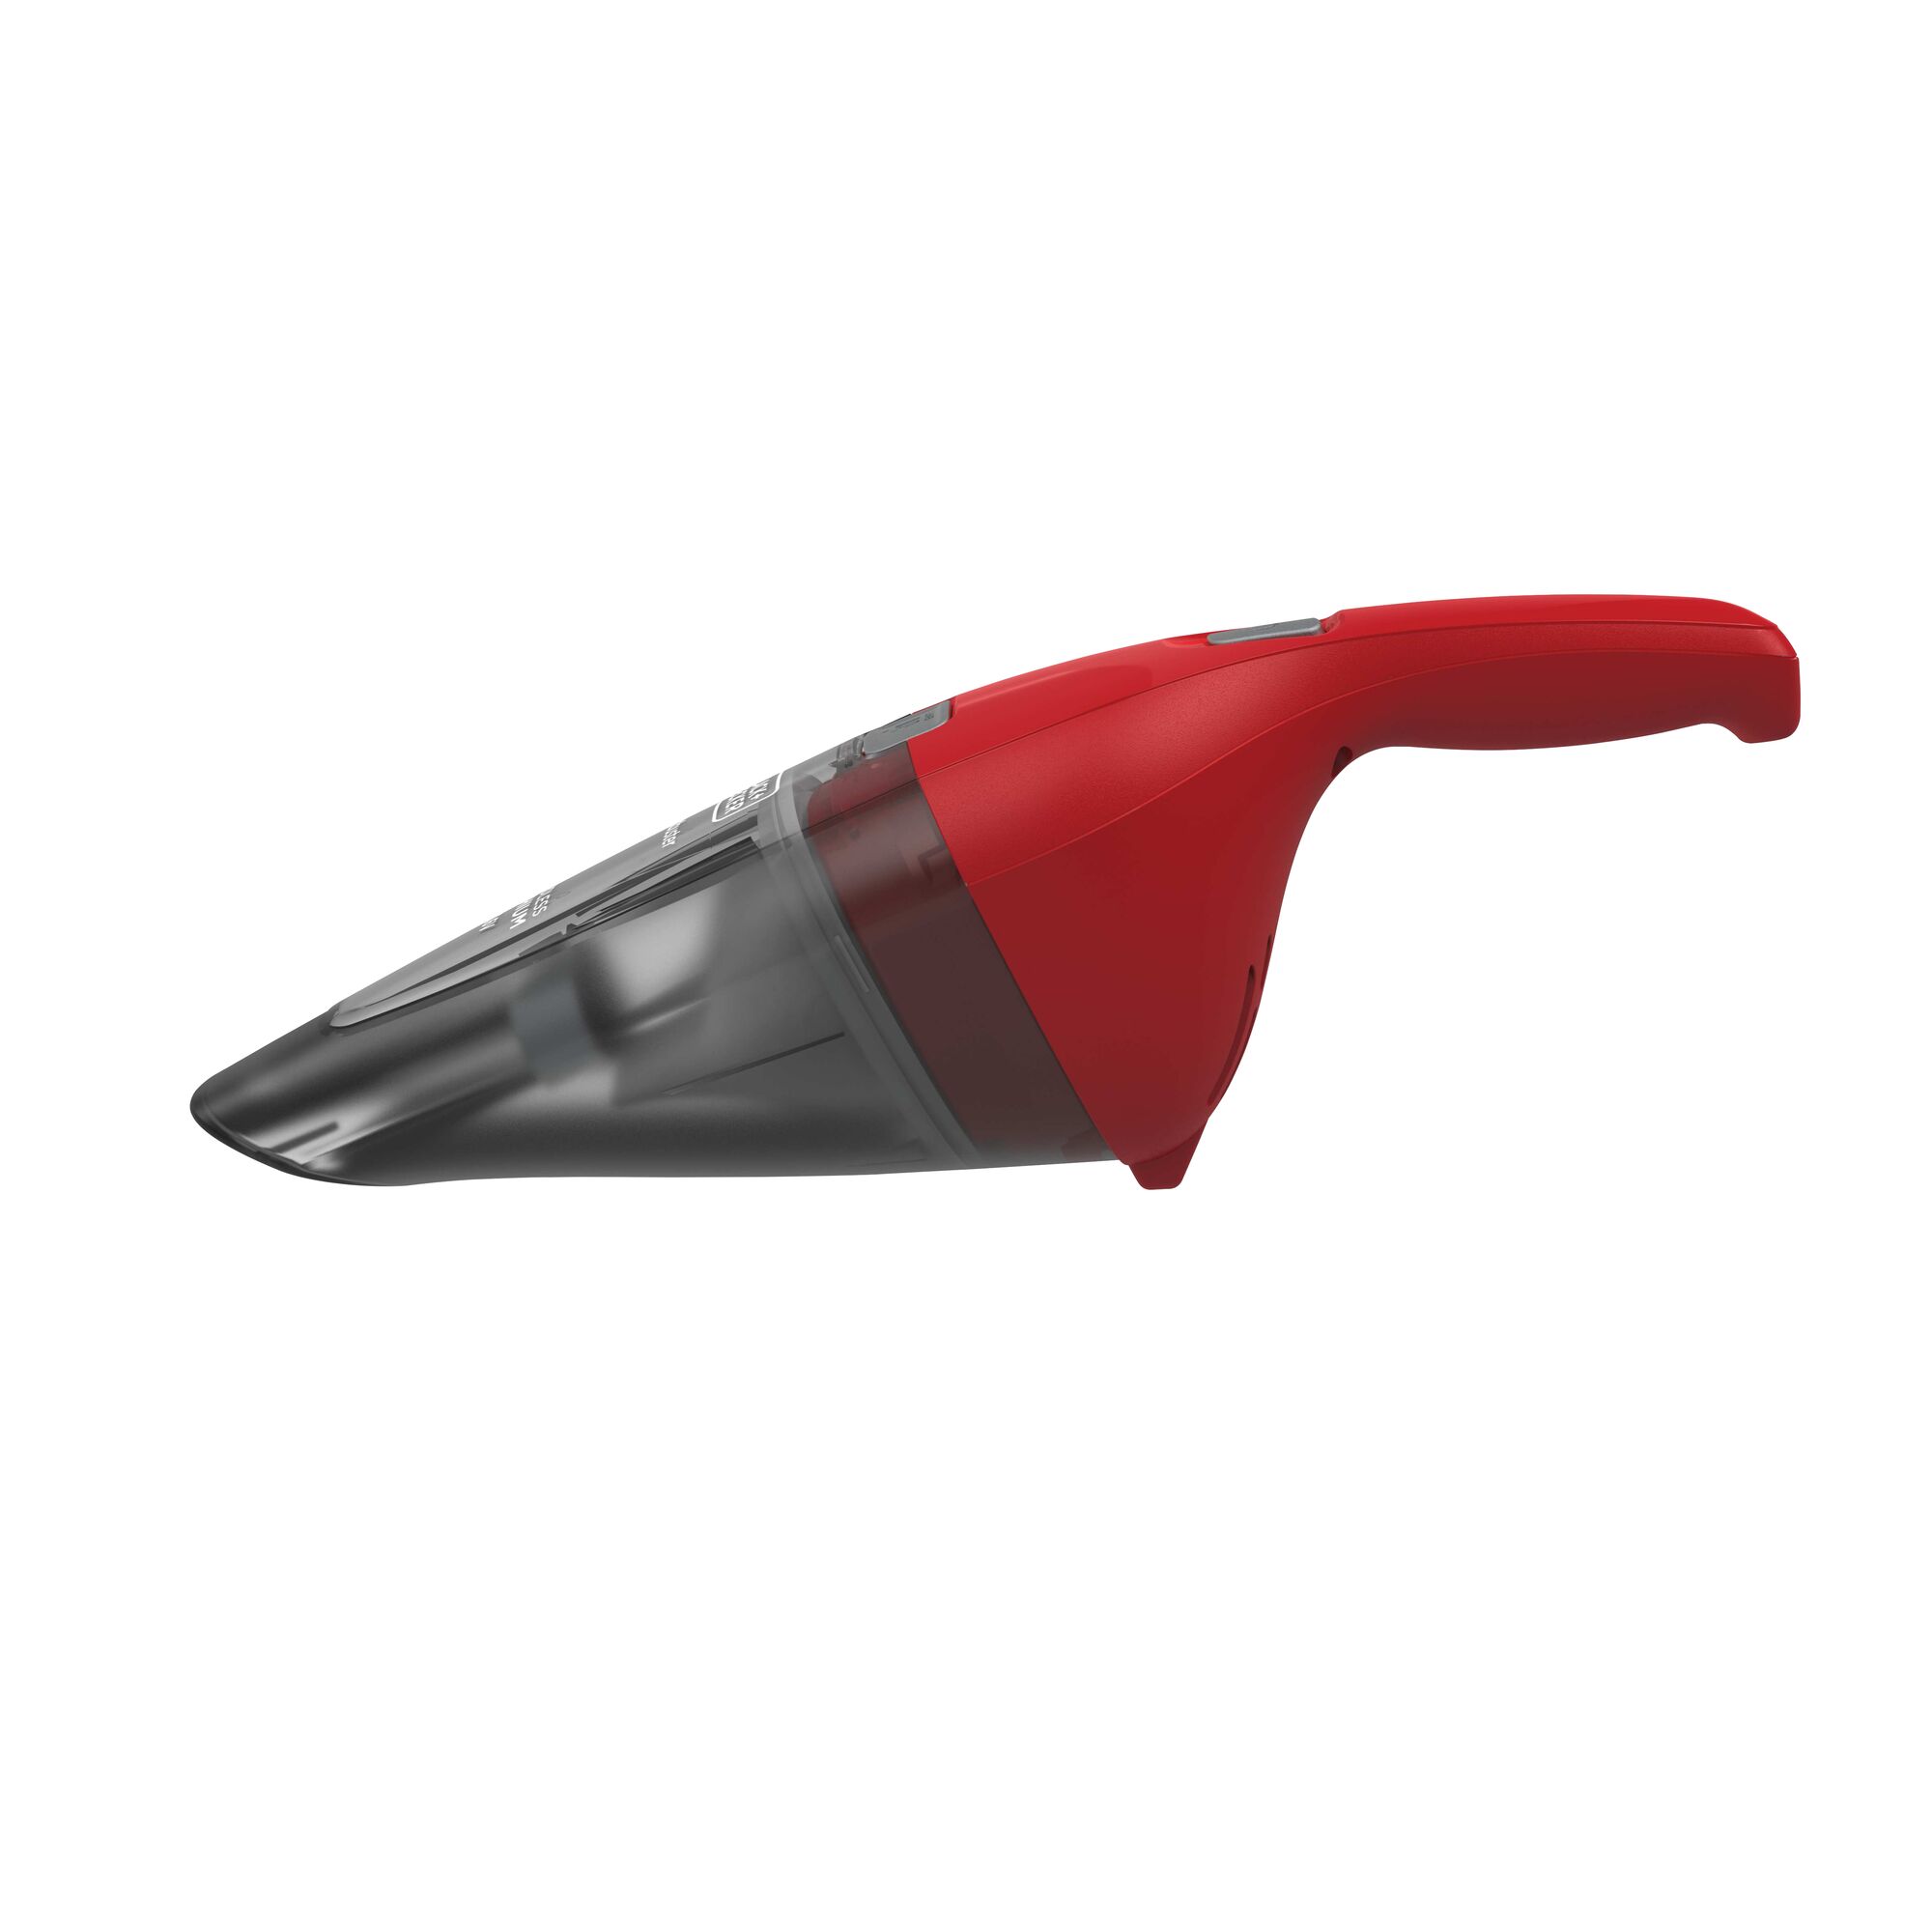 Side profile of dustbuster QuickClean cordless hand vacuum.